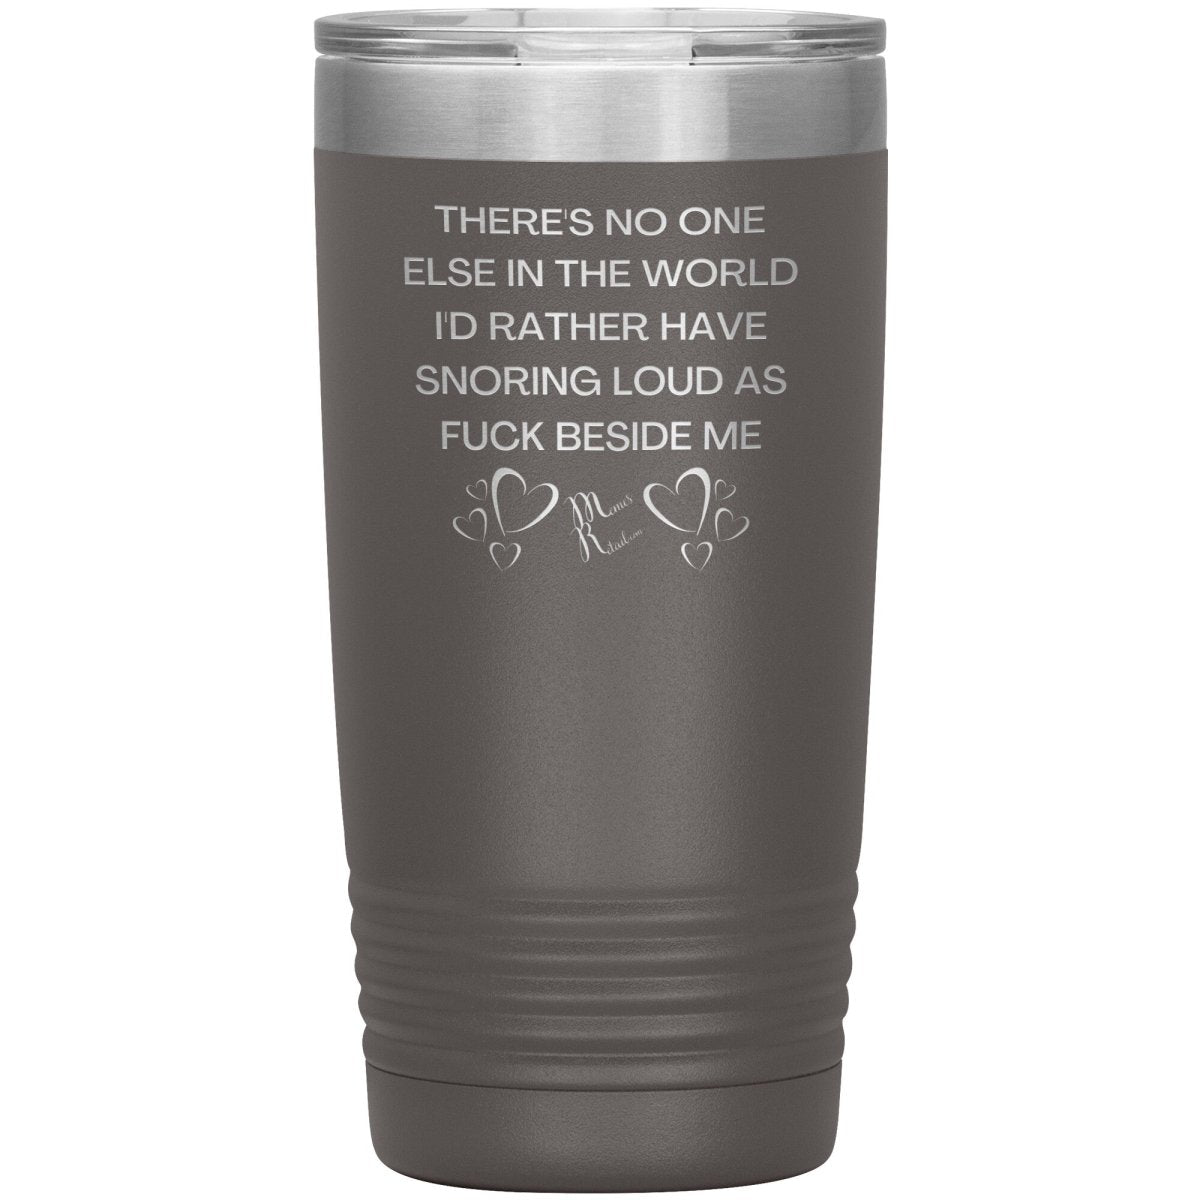 There's No One Else in the World I'd Rather Have Snoring Loud, 20oz Insulated Tumbler / Pewter - MemesRetail.com